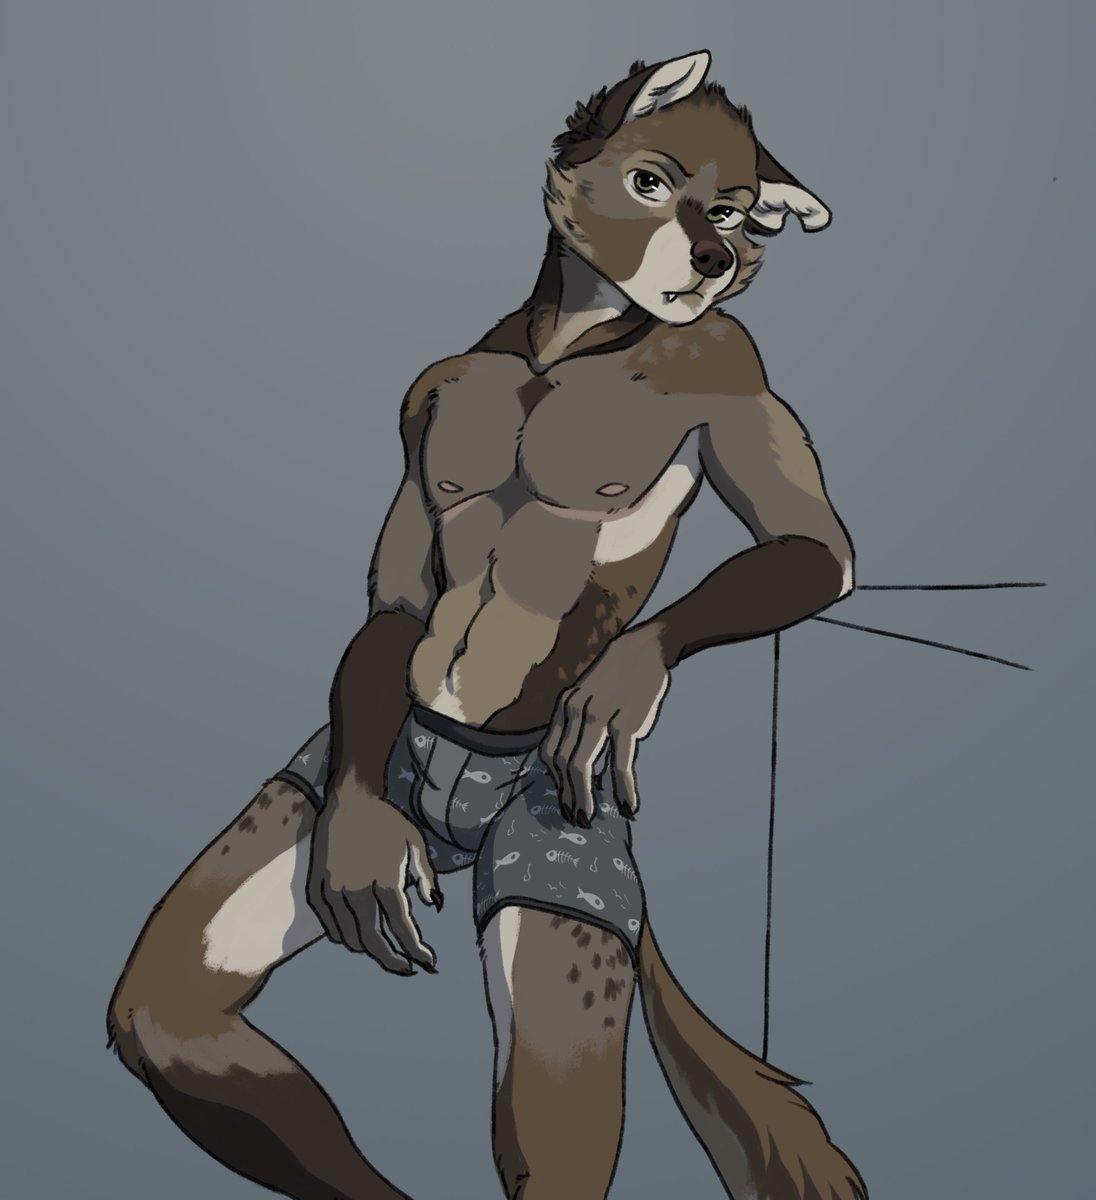 Boy why you got no pants on come on my dude

#furry #furryart #anthro #drawing #artist #wolfboy